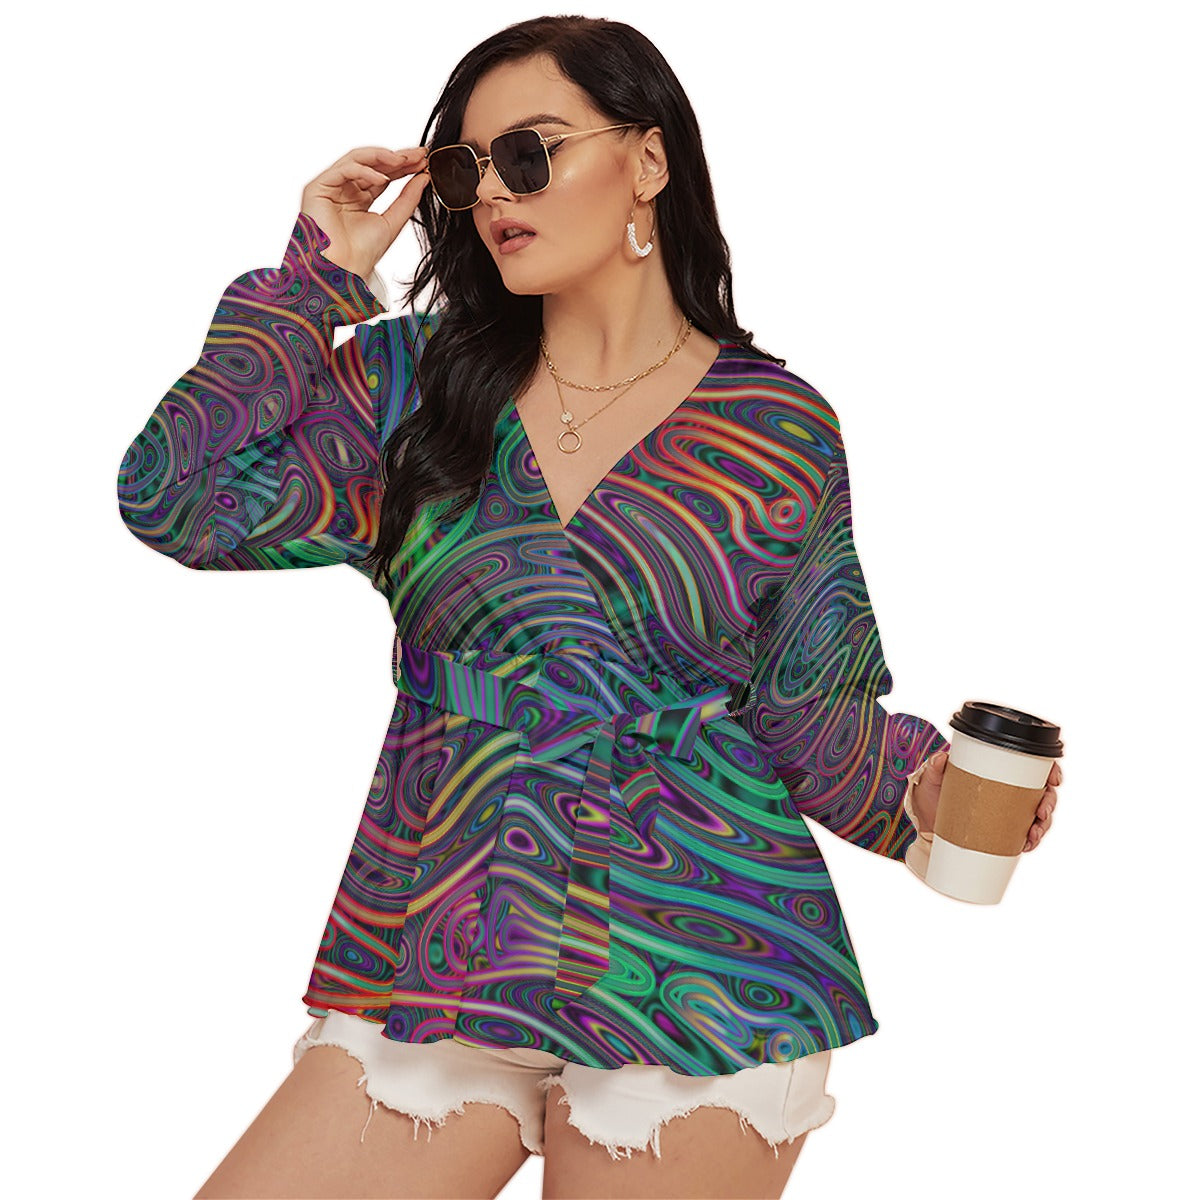 Psychedelic Swirl All-Over Print Women's V-neck T-shirt With Waistband (Plus Size)